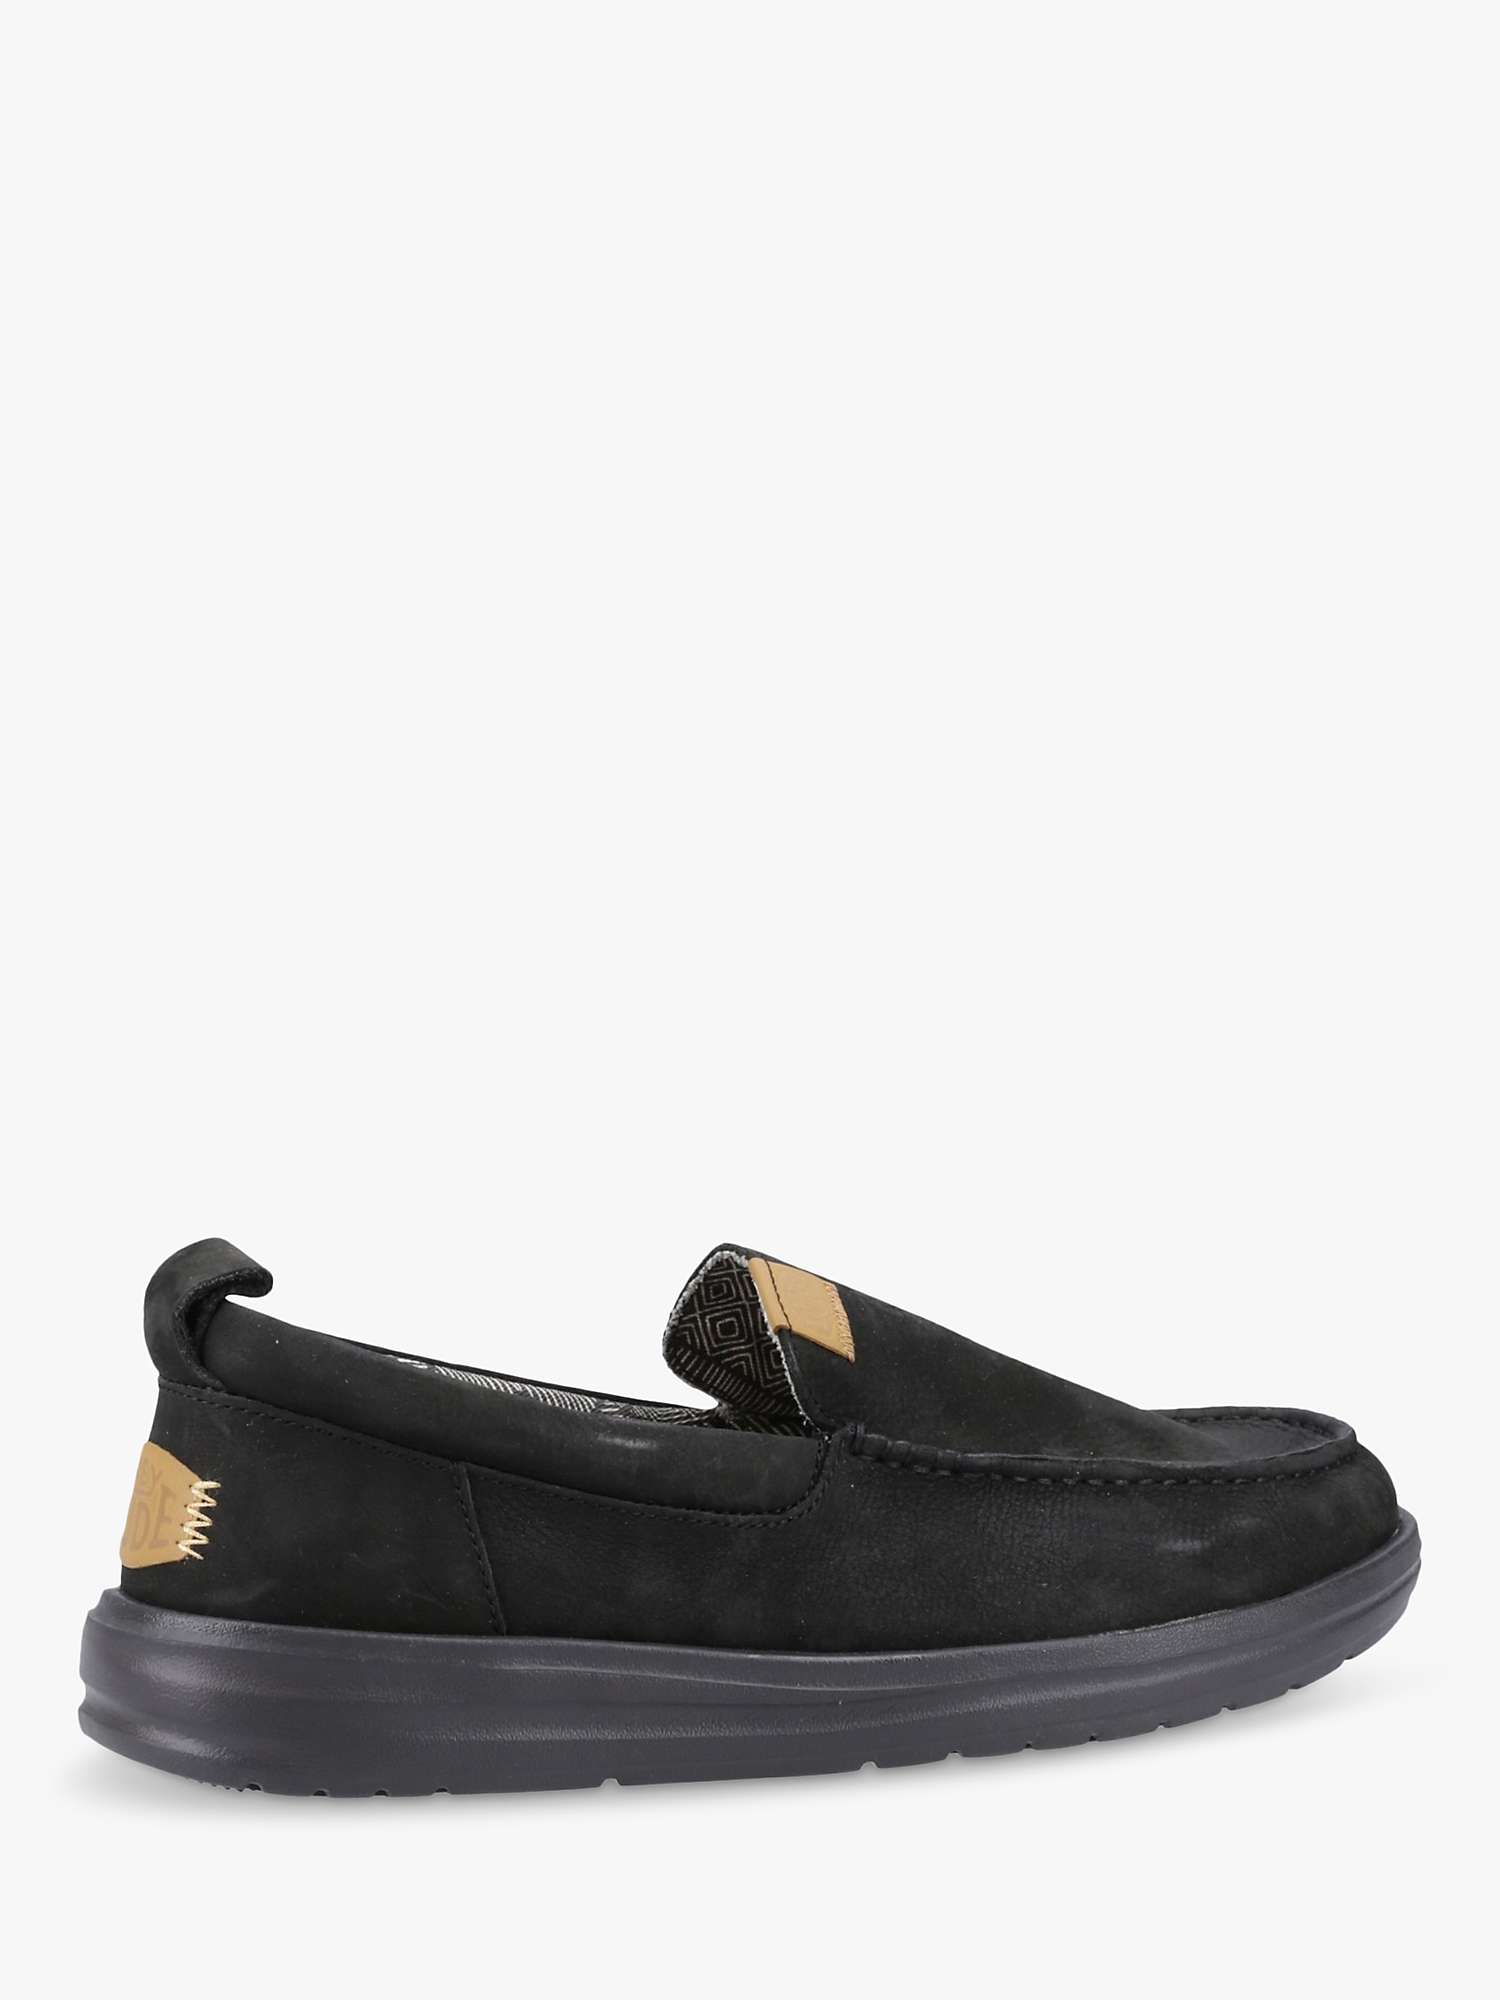 Buy Hey Dude Wally Grip Moccasin Shoes Online at johnlewis.com